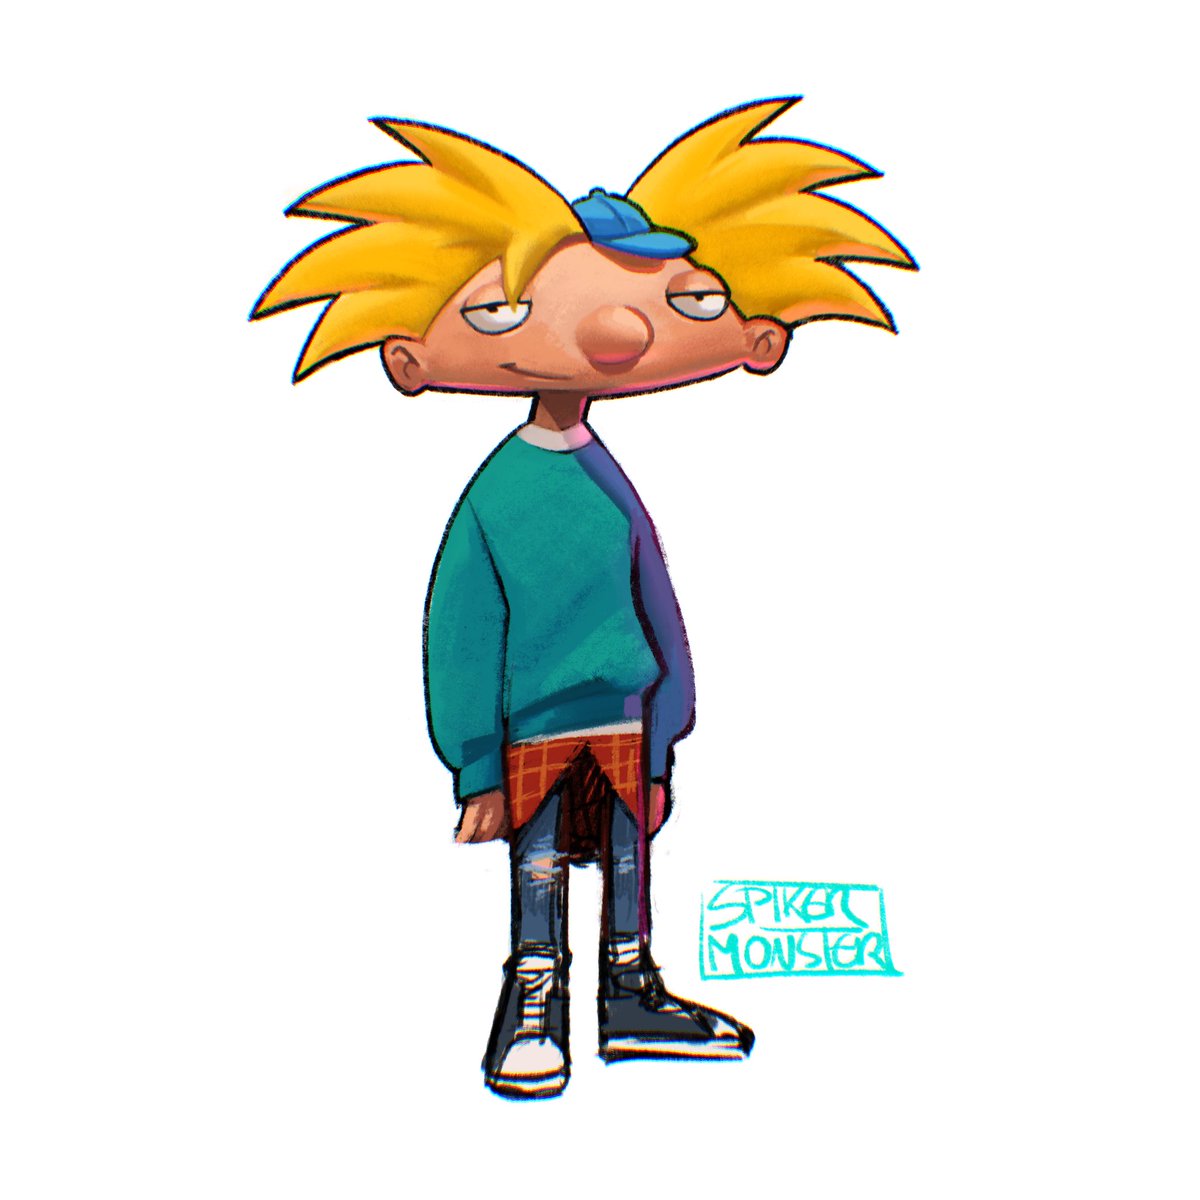 「arnold doodle #heyarnold 」|Spike R. Monster 💀のイラスト